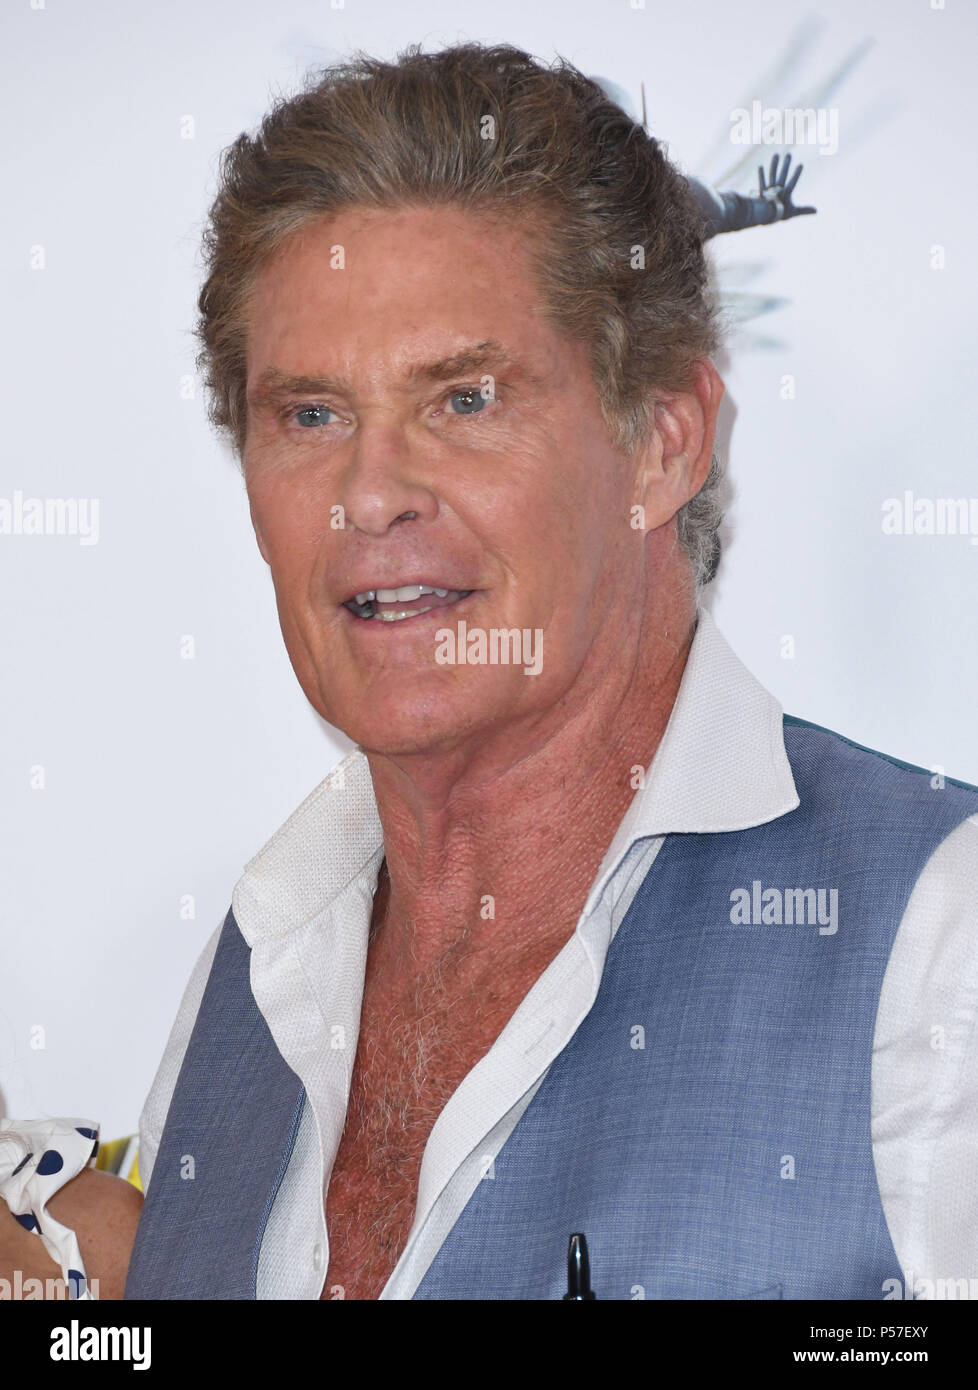 June 25, 2018 - Hollywood, CA, U.S. - 25 June 2018 - Hollywood, California - David Hasselhoff. ''Ant-Man and The Wasp' Los Angeles Premiere held at theEl Capitan Theatre. Photo Credit: Birdie Thompson/AdMedia (Credit Image: © Birdie Thompson/AdMedia via ZUMA Wire) Stock Photo